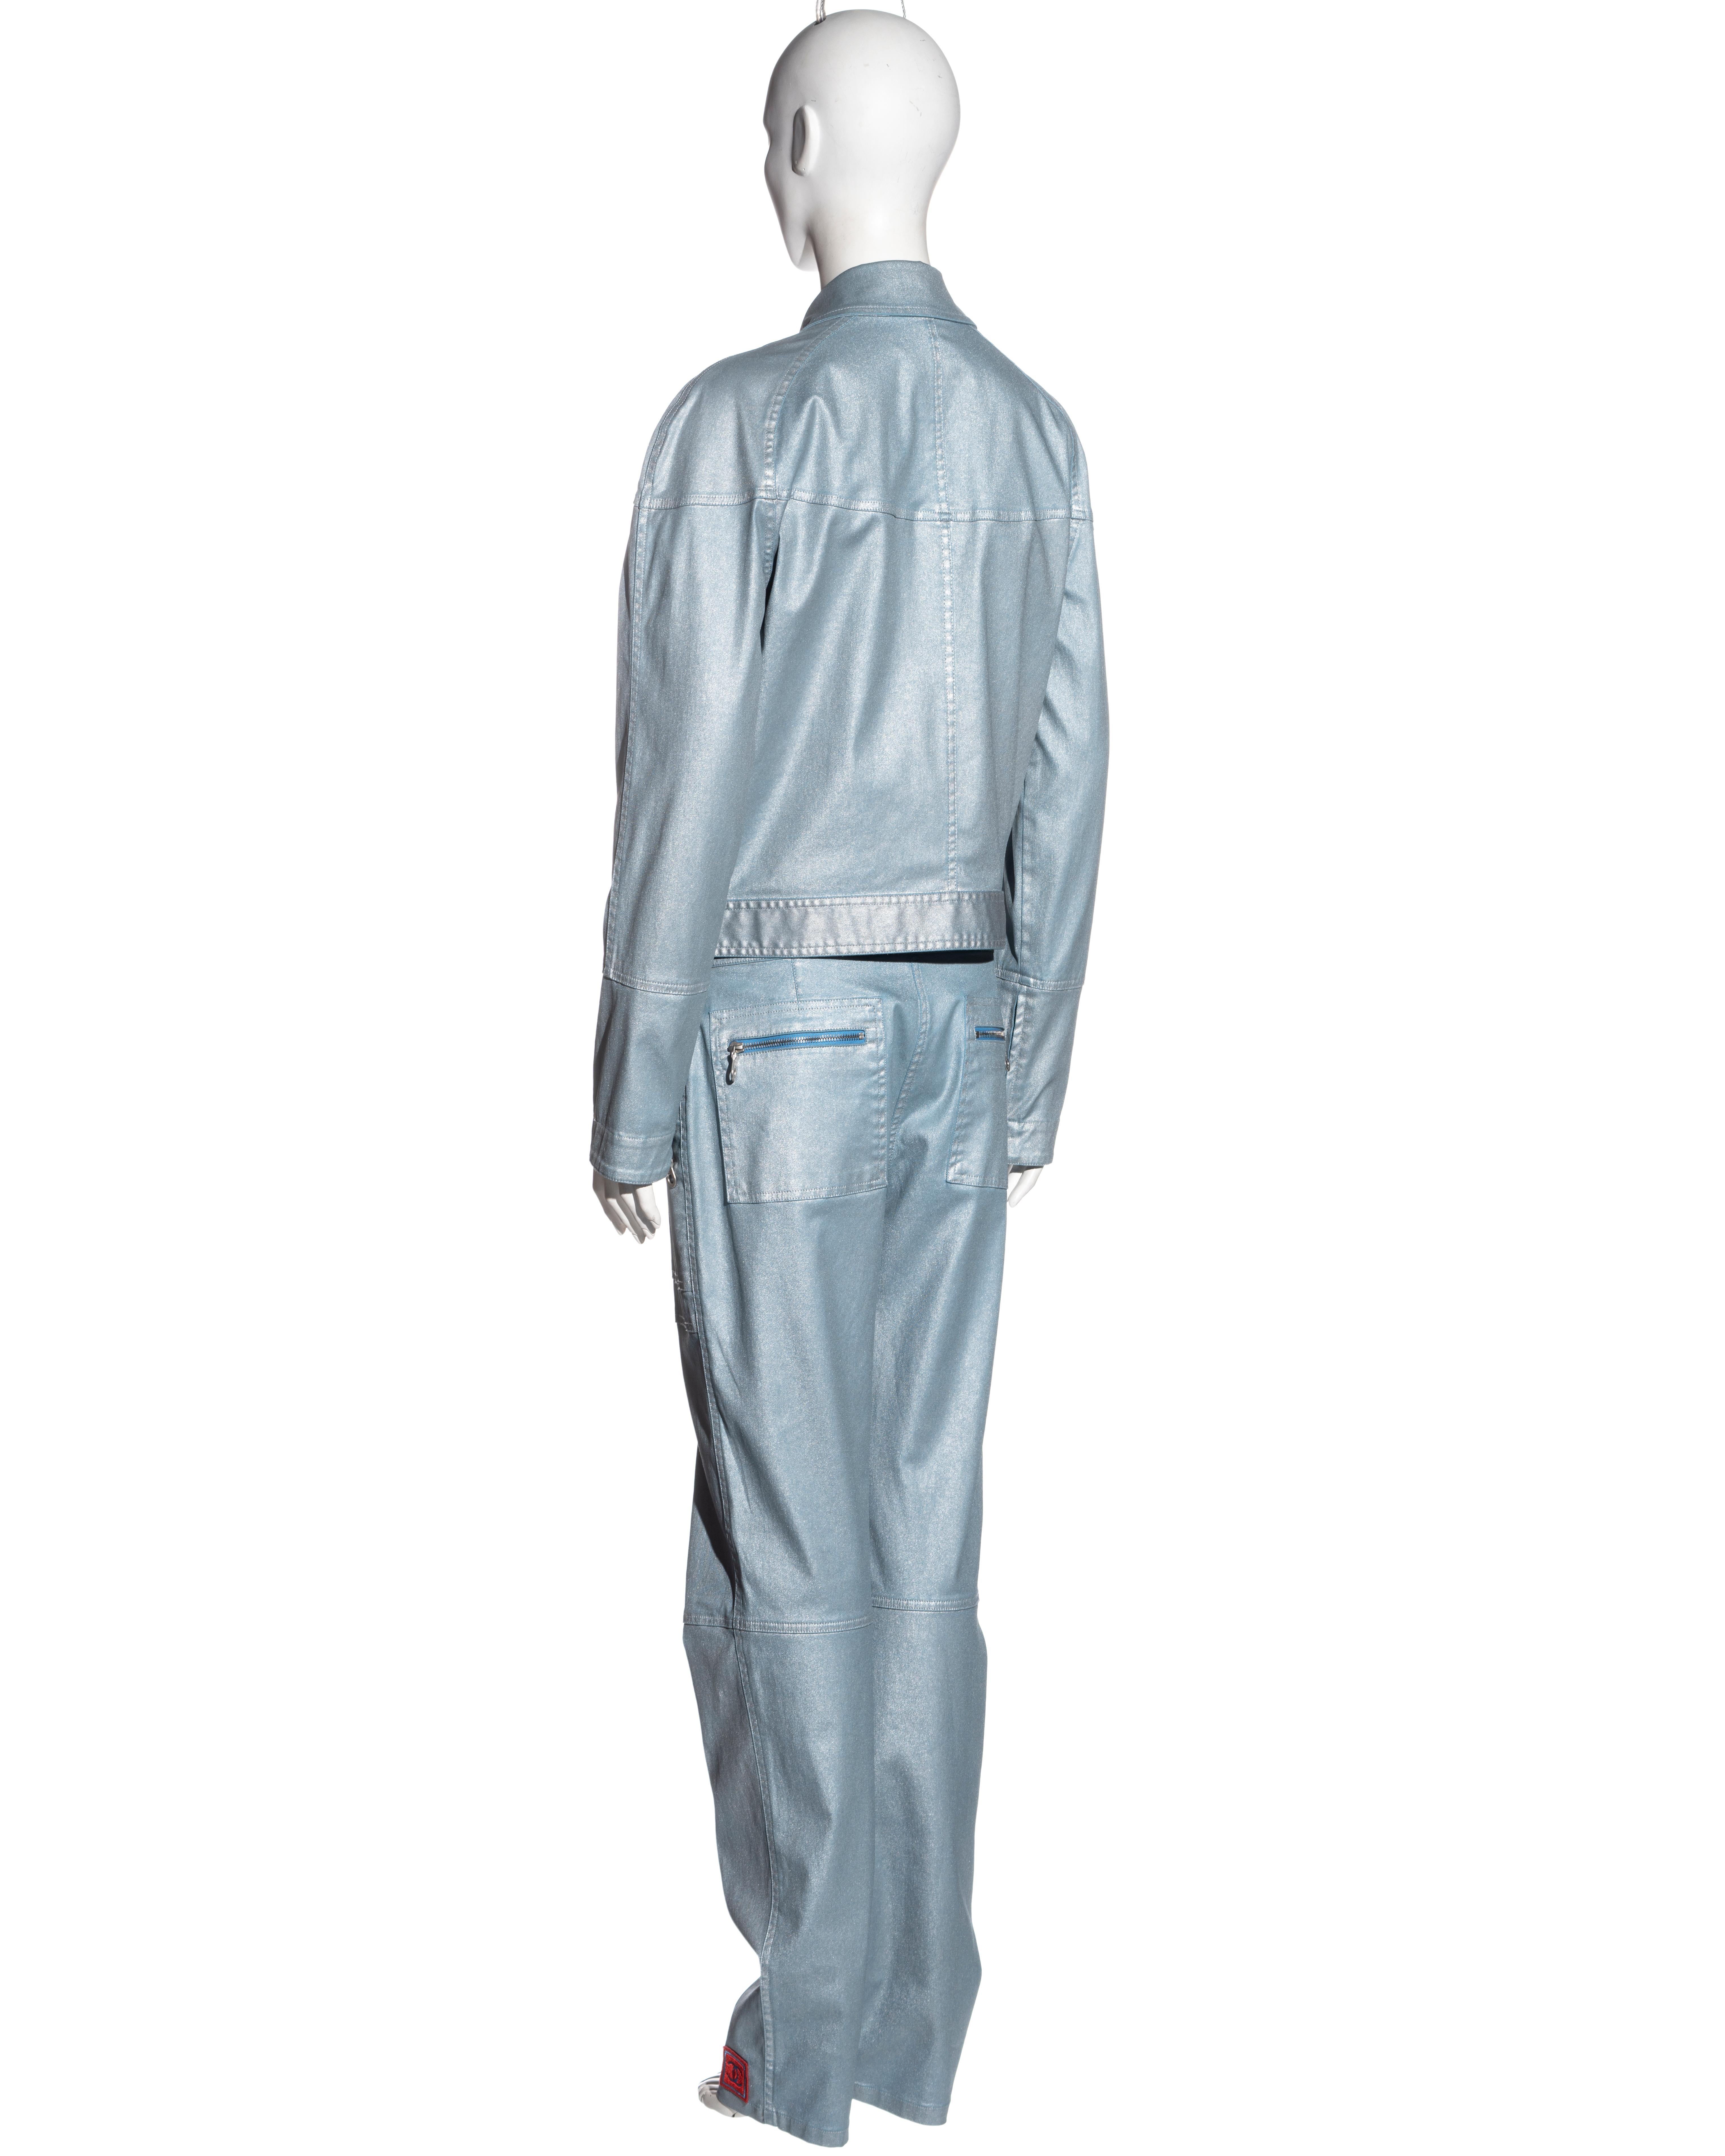 Chanel by Karl Lagerfeld metallic blue cotton jacket and pants set, ss 2002 For Sale 3